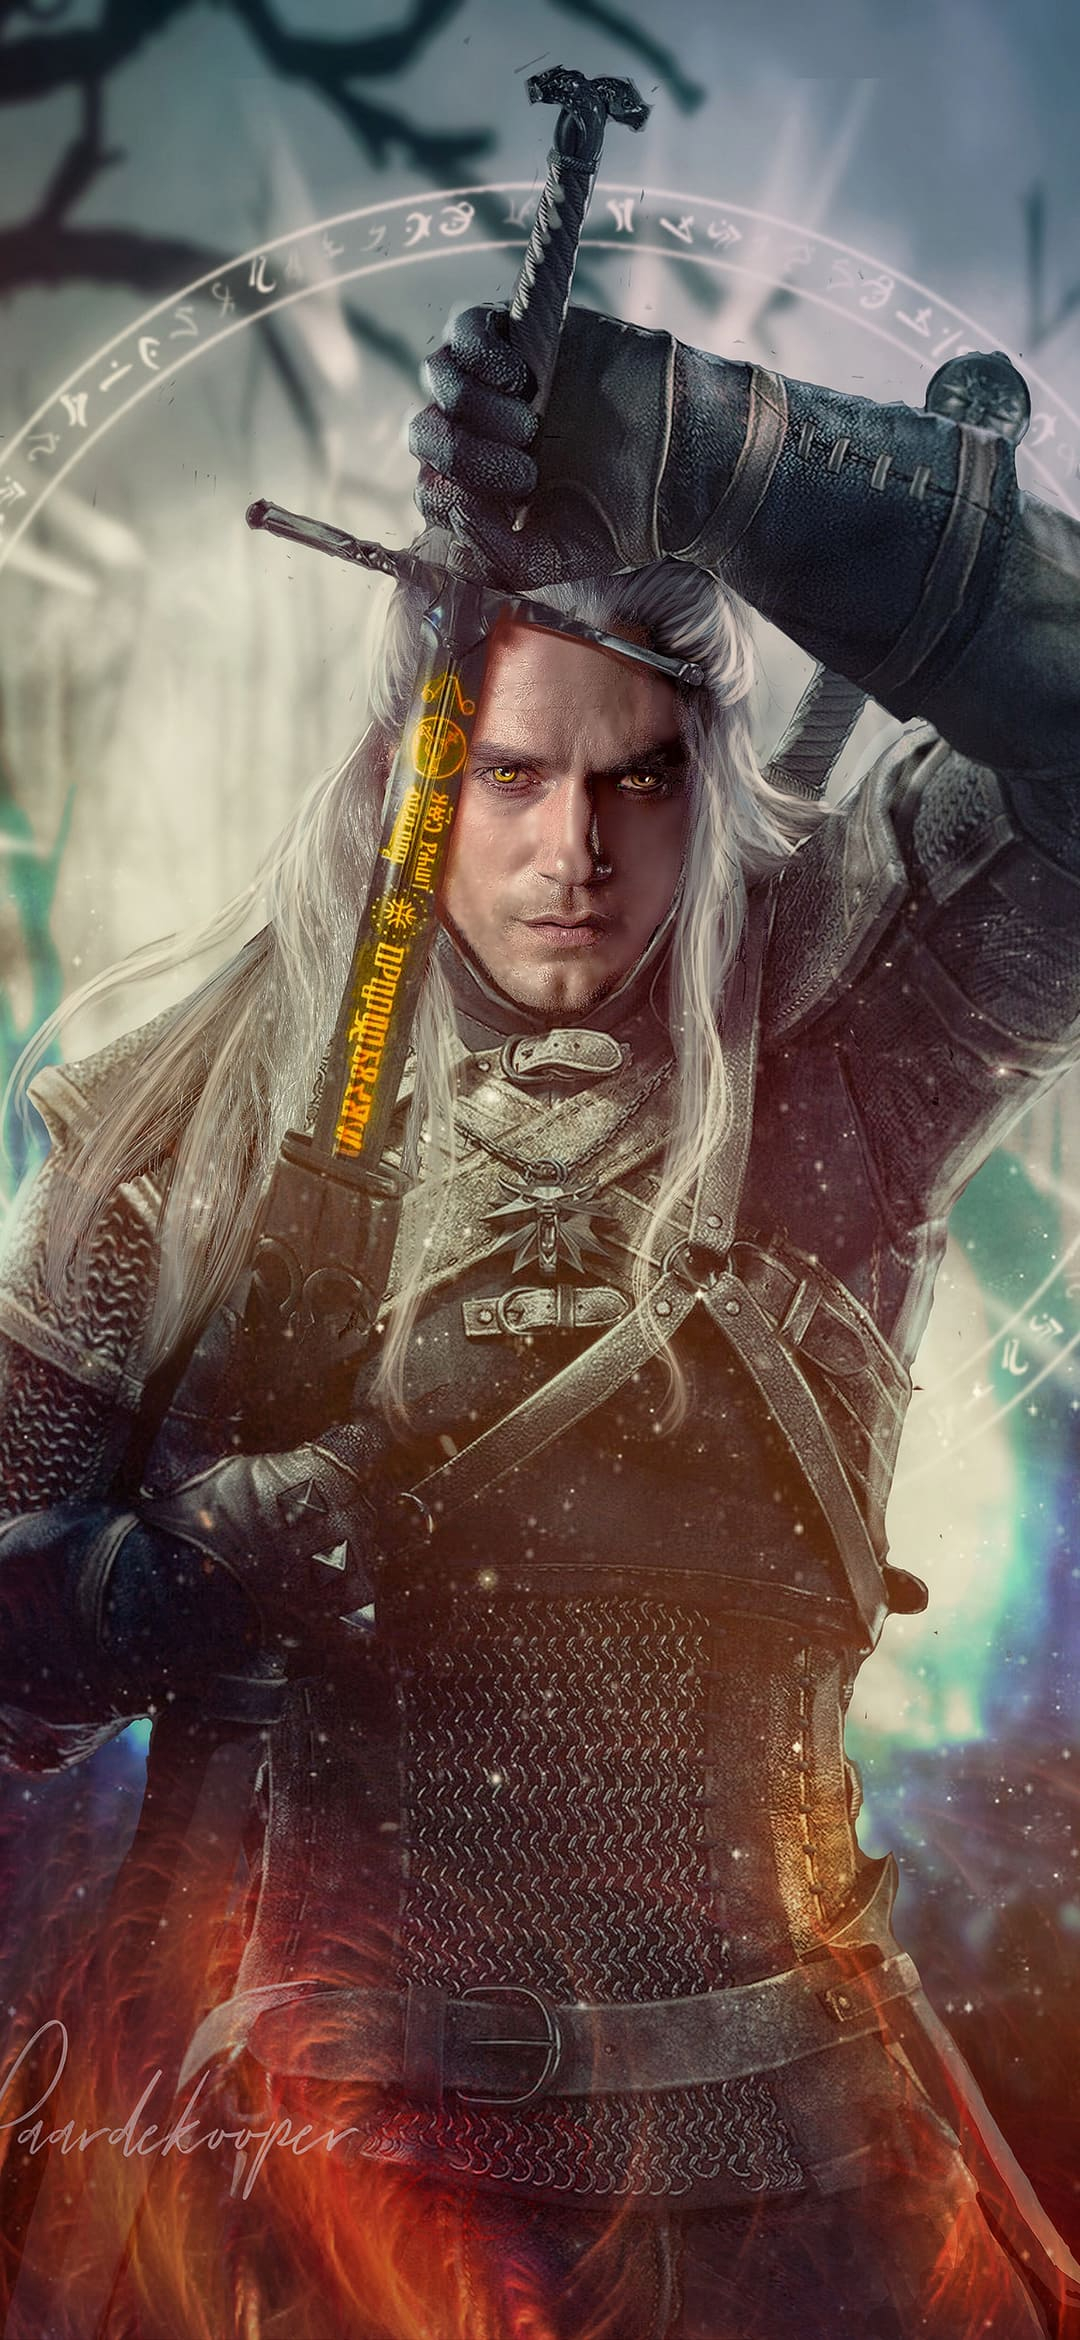 1080x2340 The Witcher Wallpapers Top 50 Best Witcher Backgrounds Download